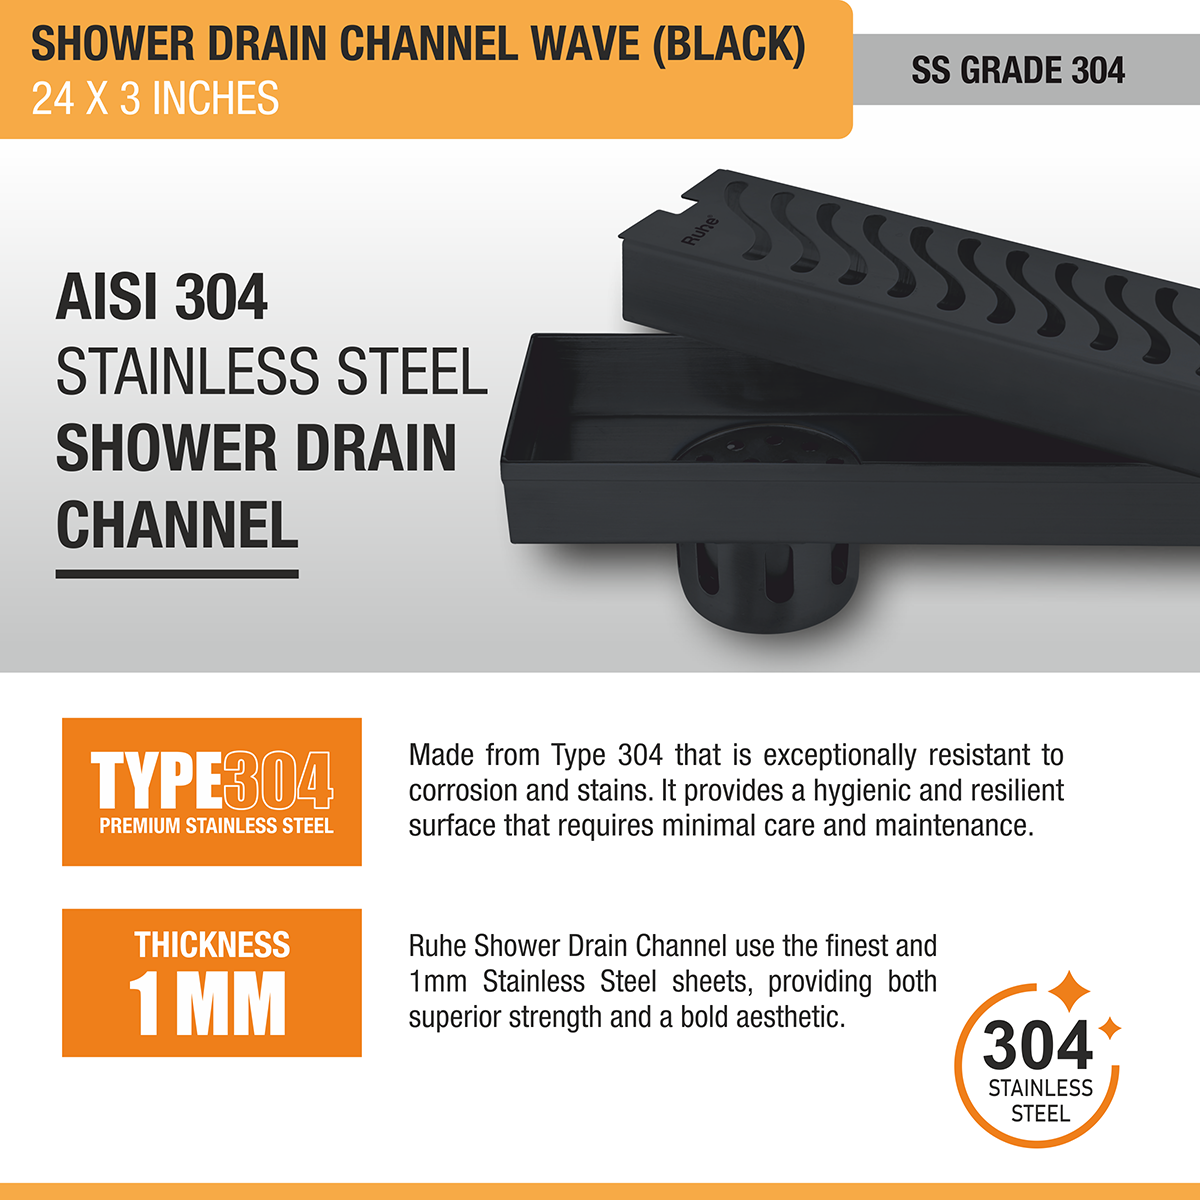 Wave Shower Drain Channel (24 x 3 Inches) Black PVD Coated stainless steel